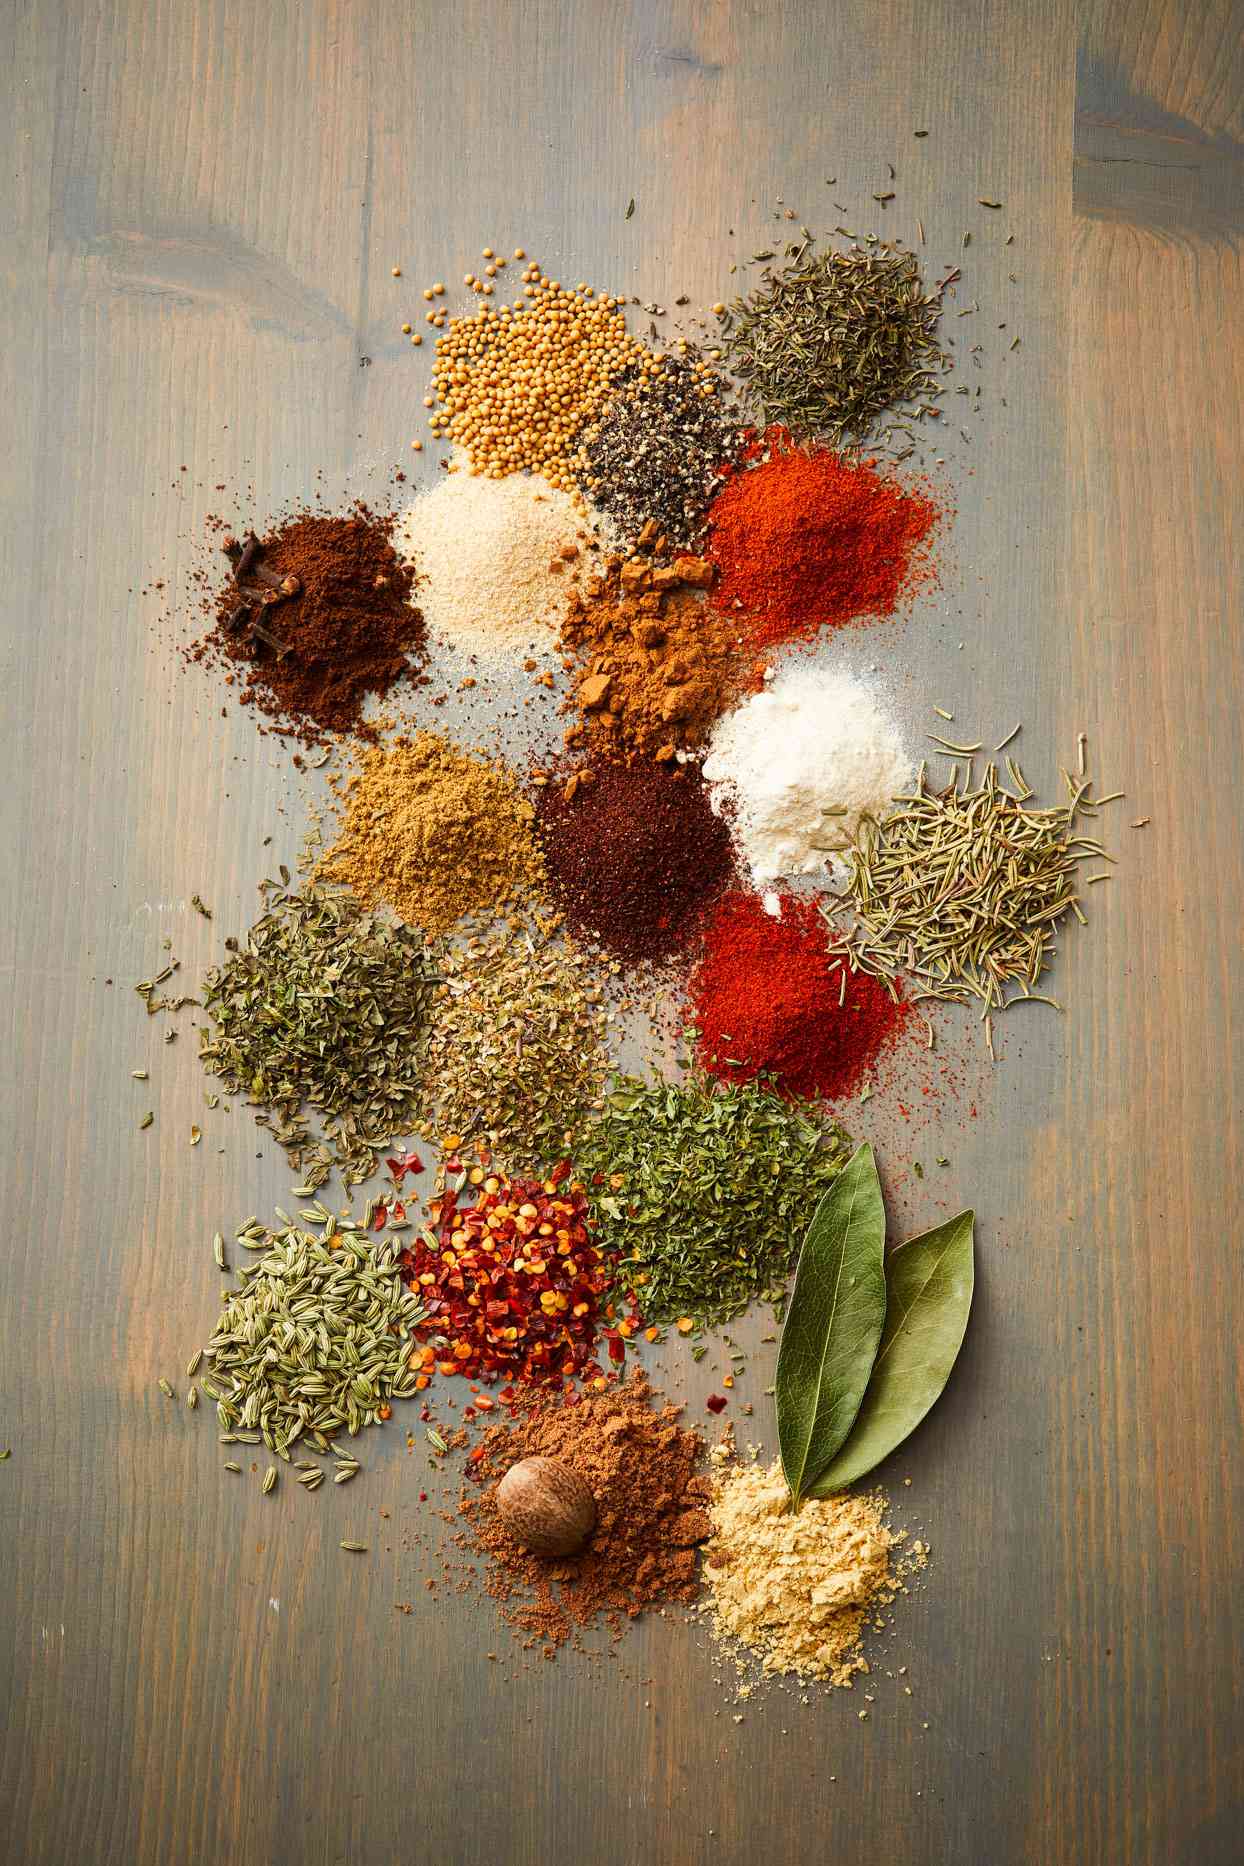 mounds of spices